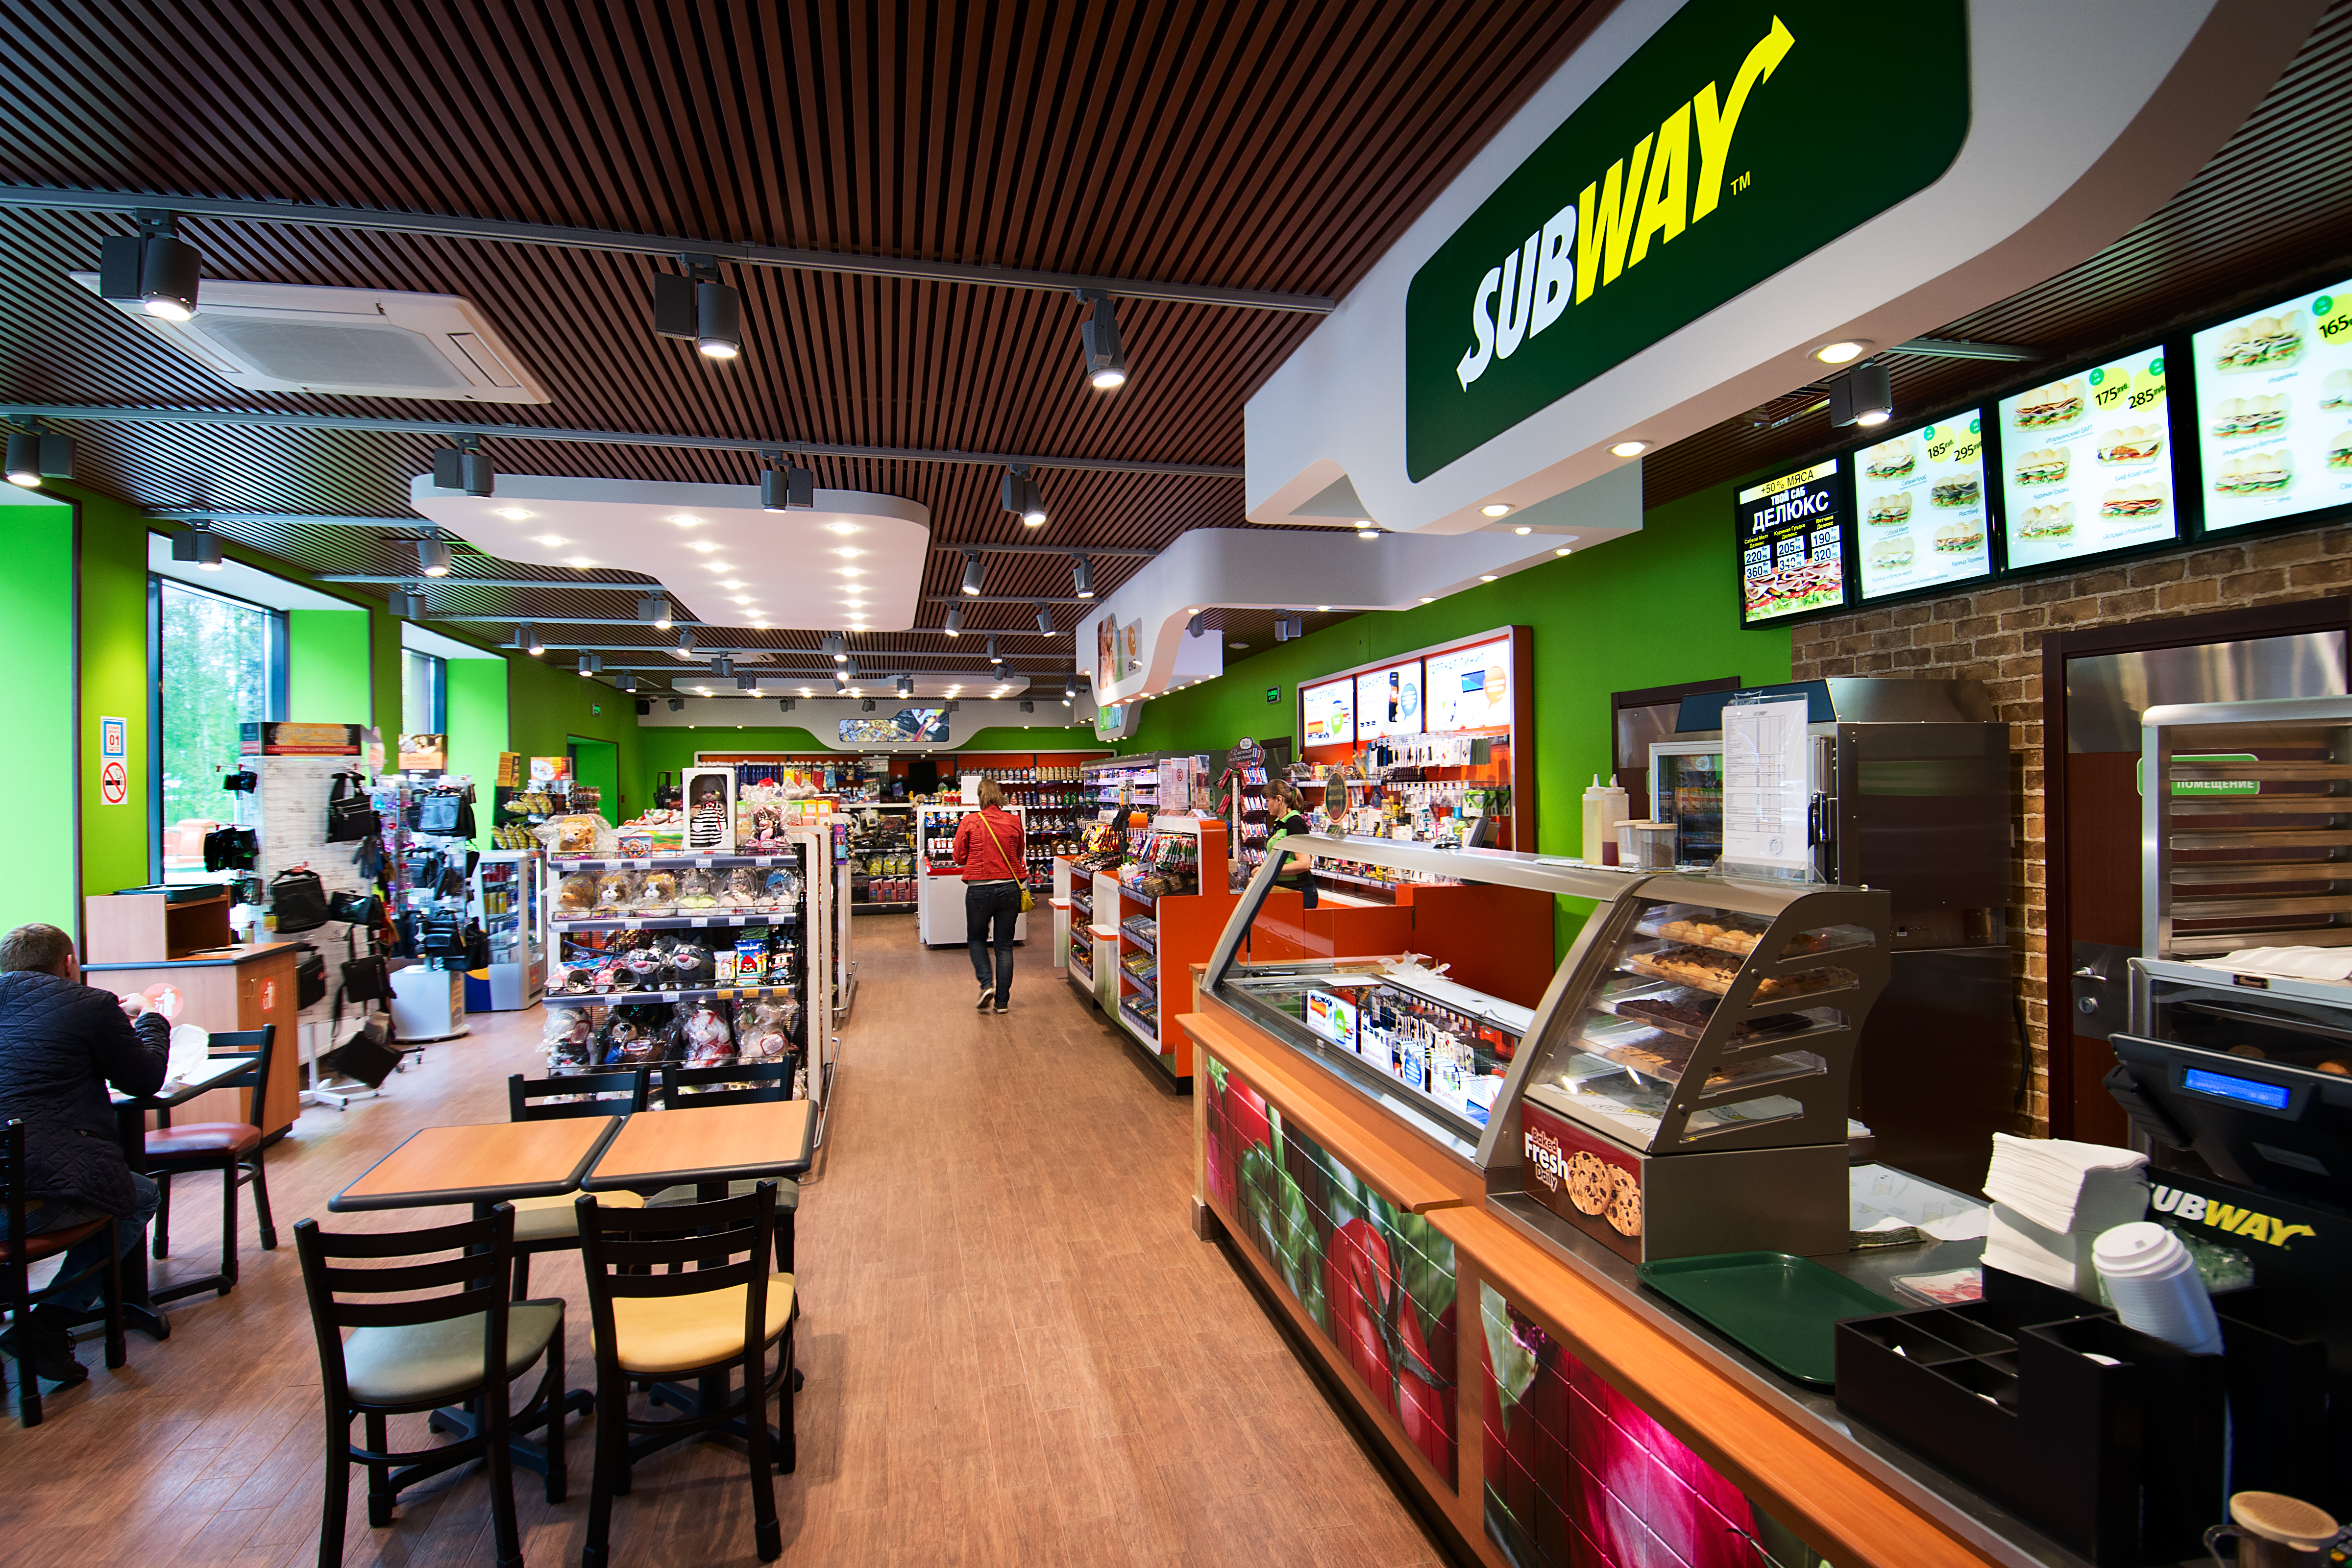 SUBWAY Russia promotes its franchise opportunities using ClickMeeting